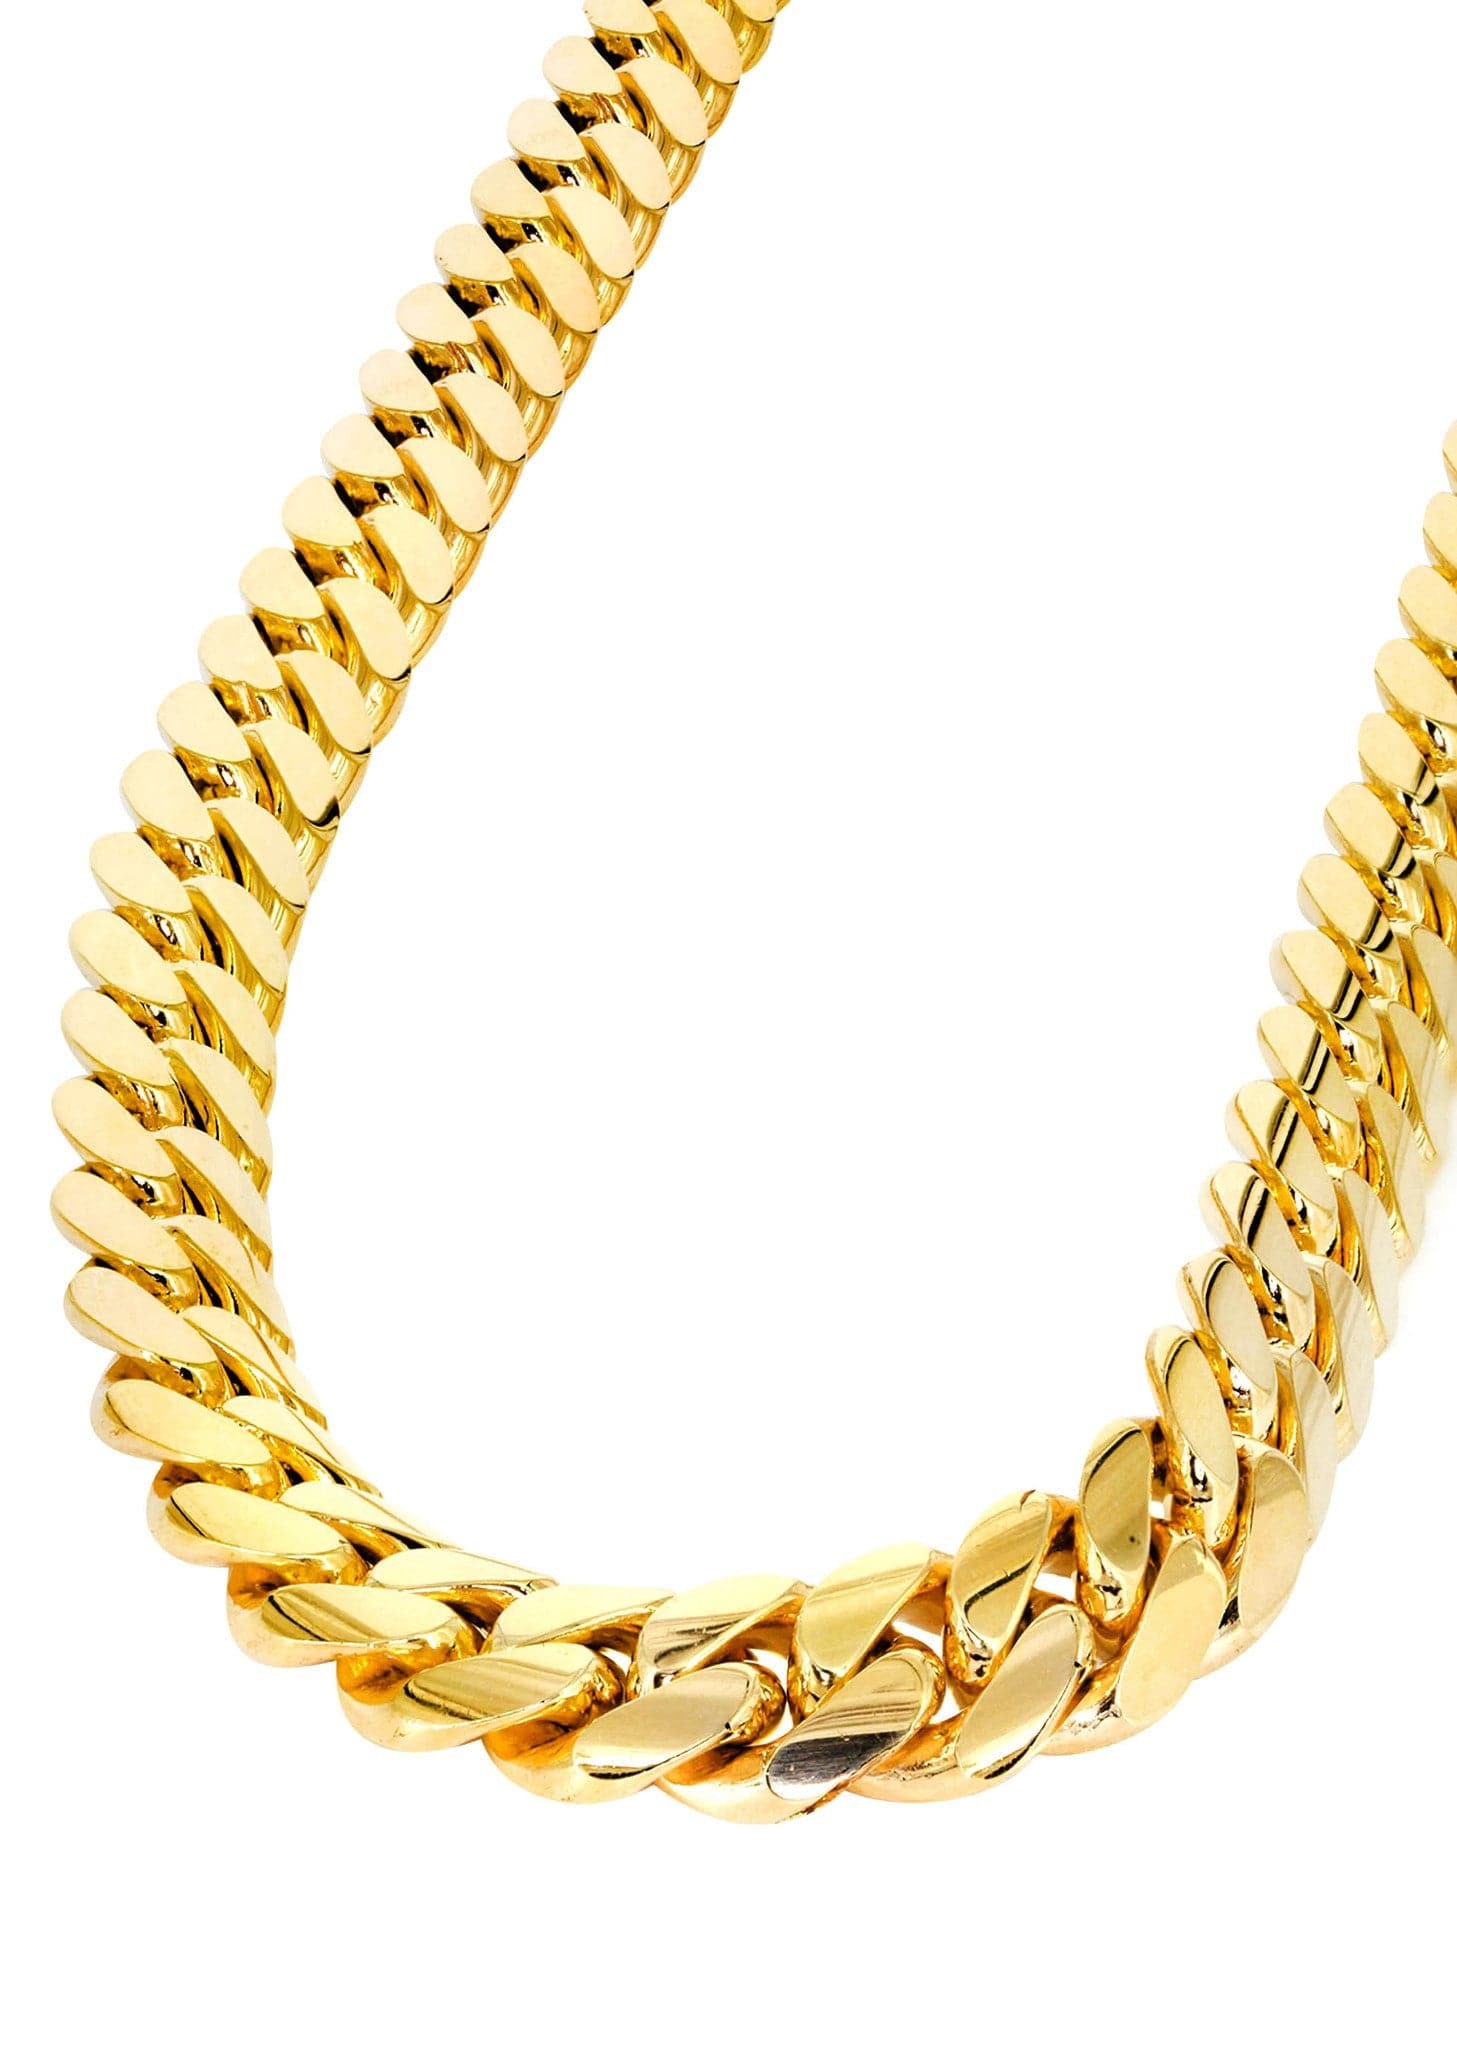 READY-TO-SHIP Miami Cuban Link Chains in 14K Gold (Over 100g)